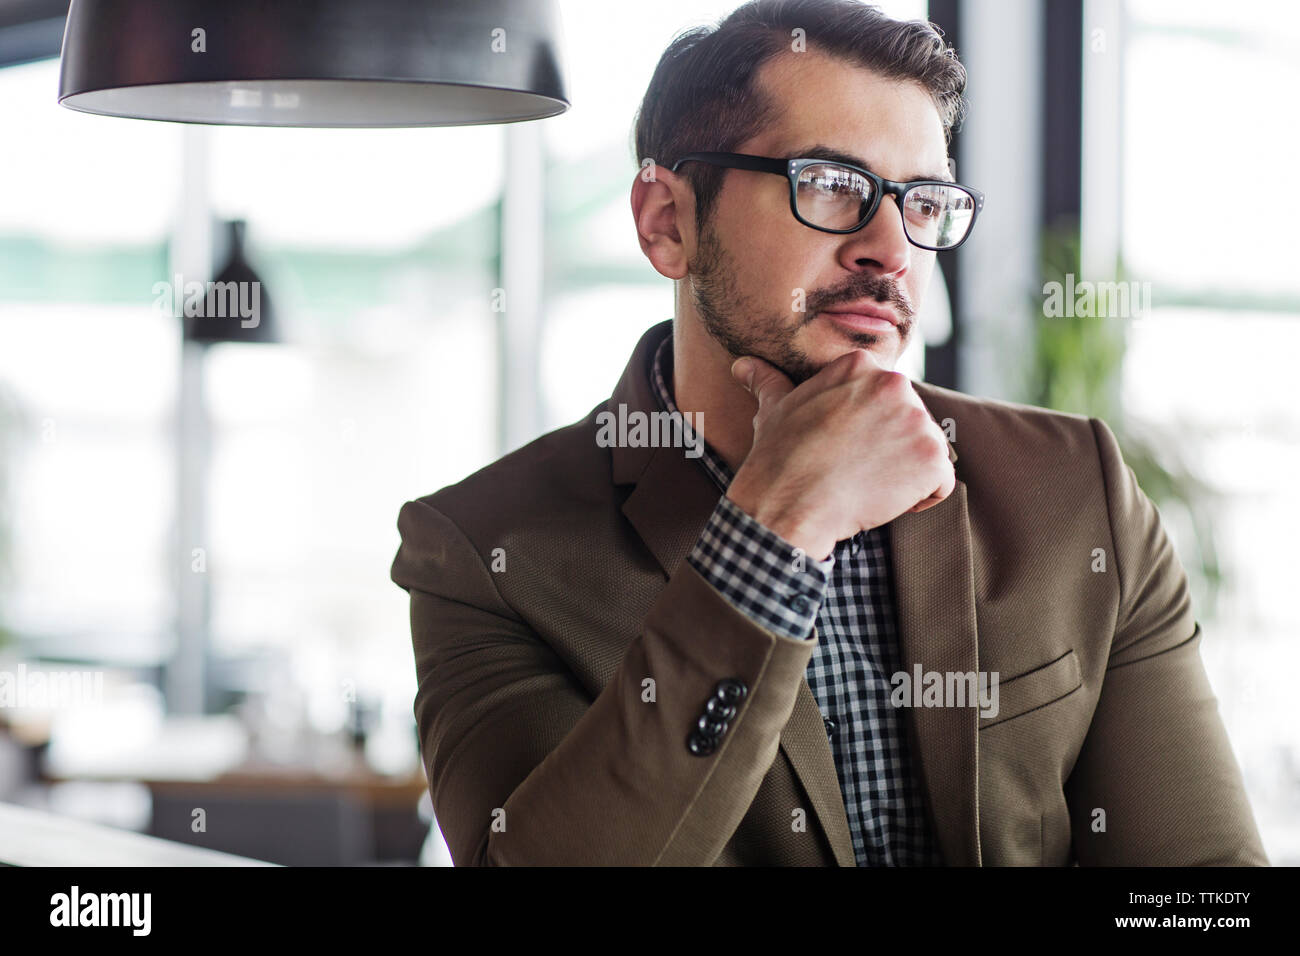 Thoughtful businessman looking away in restaurant Stock Photo